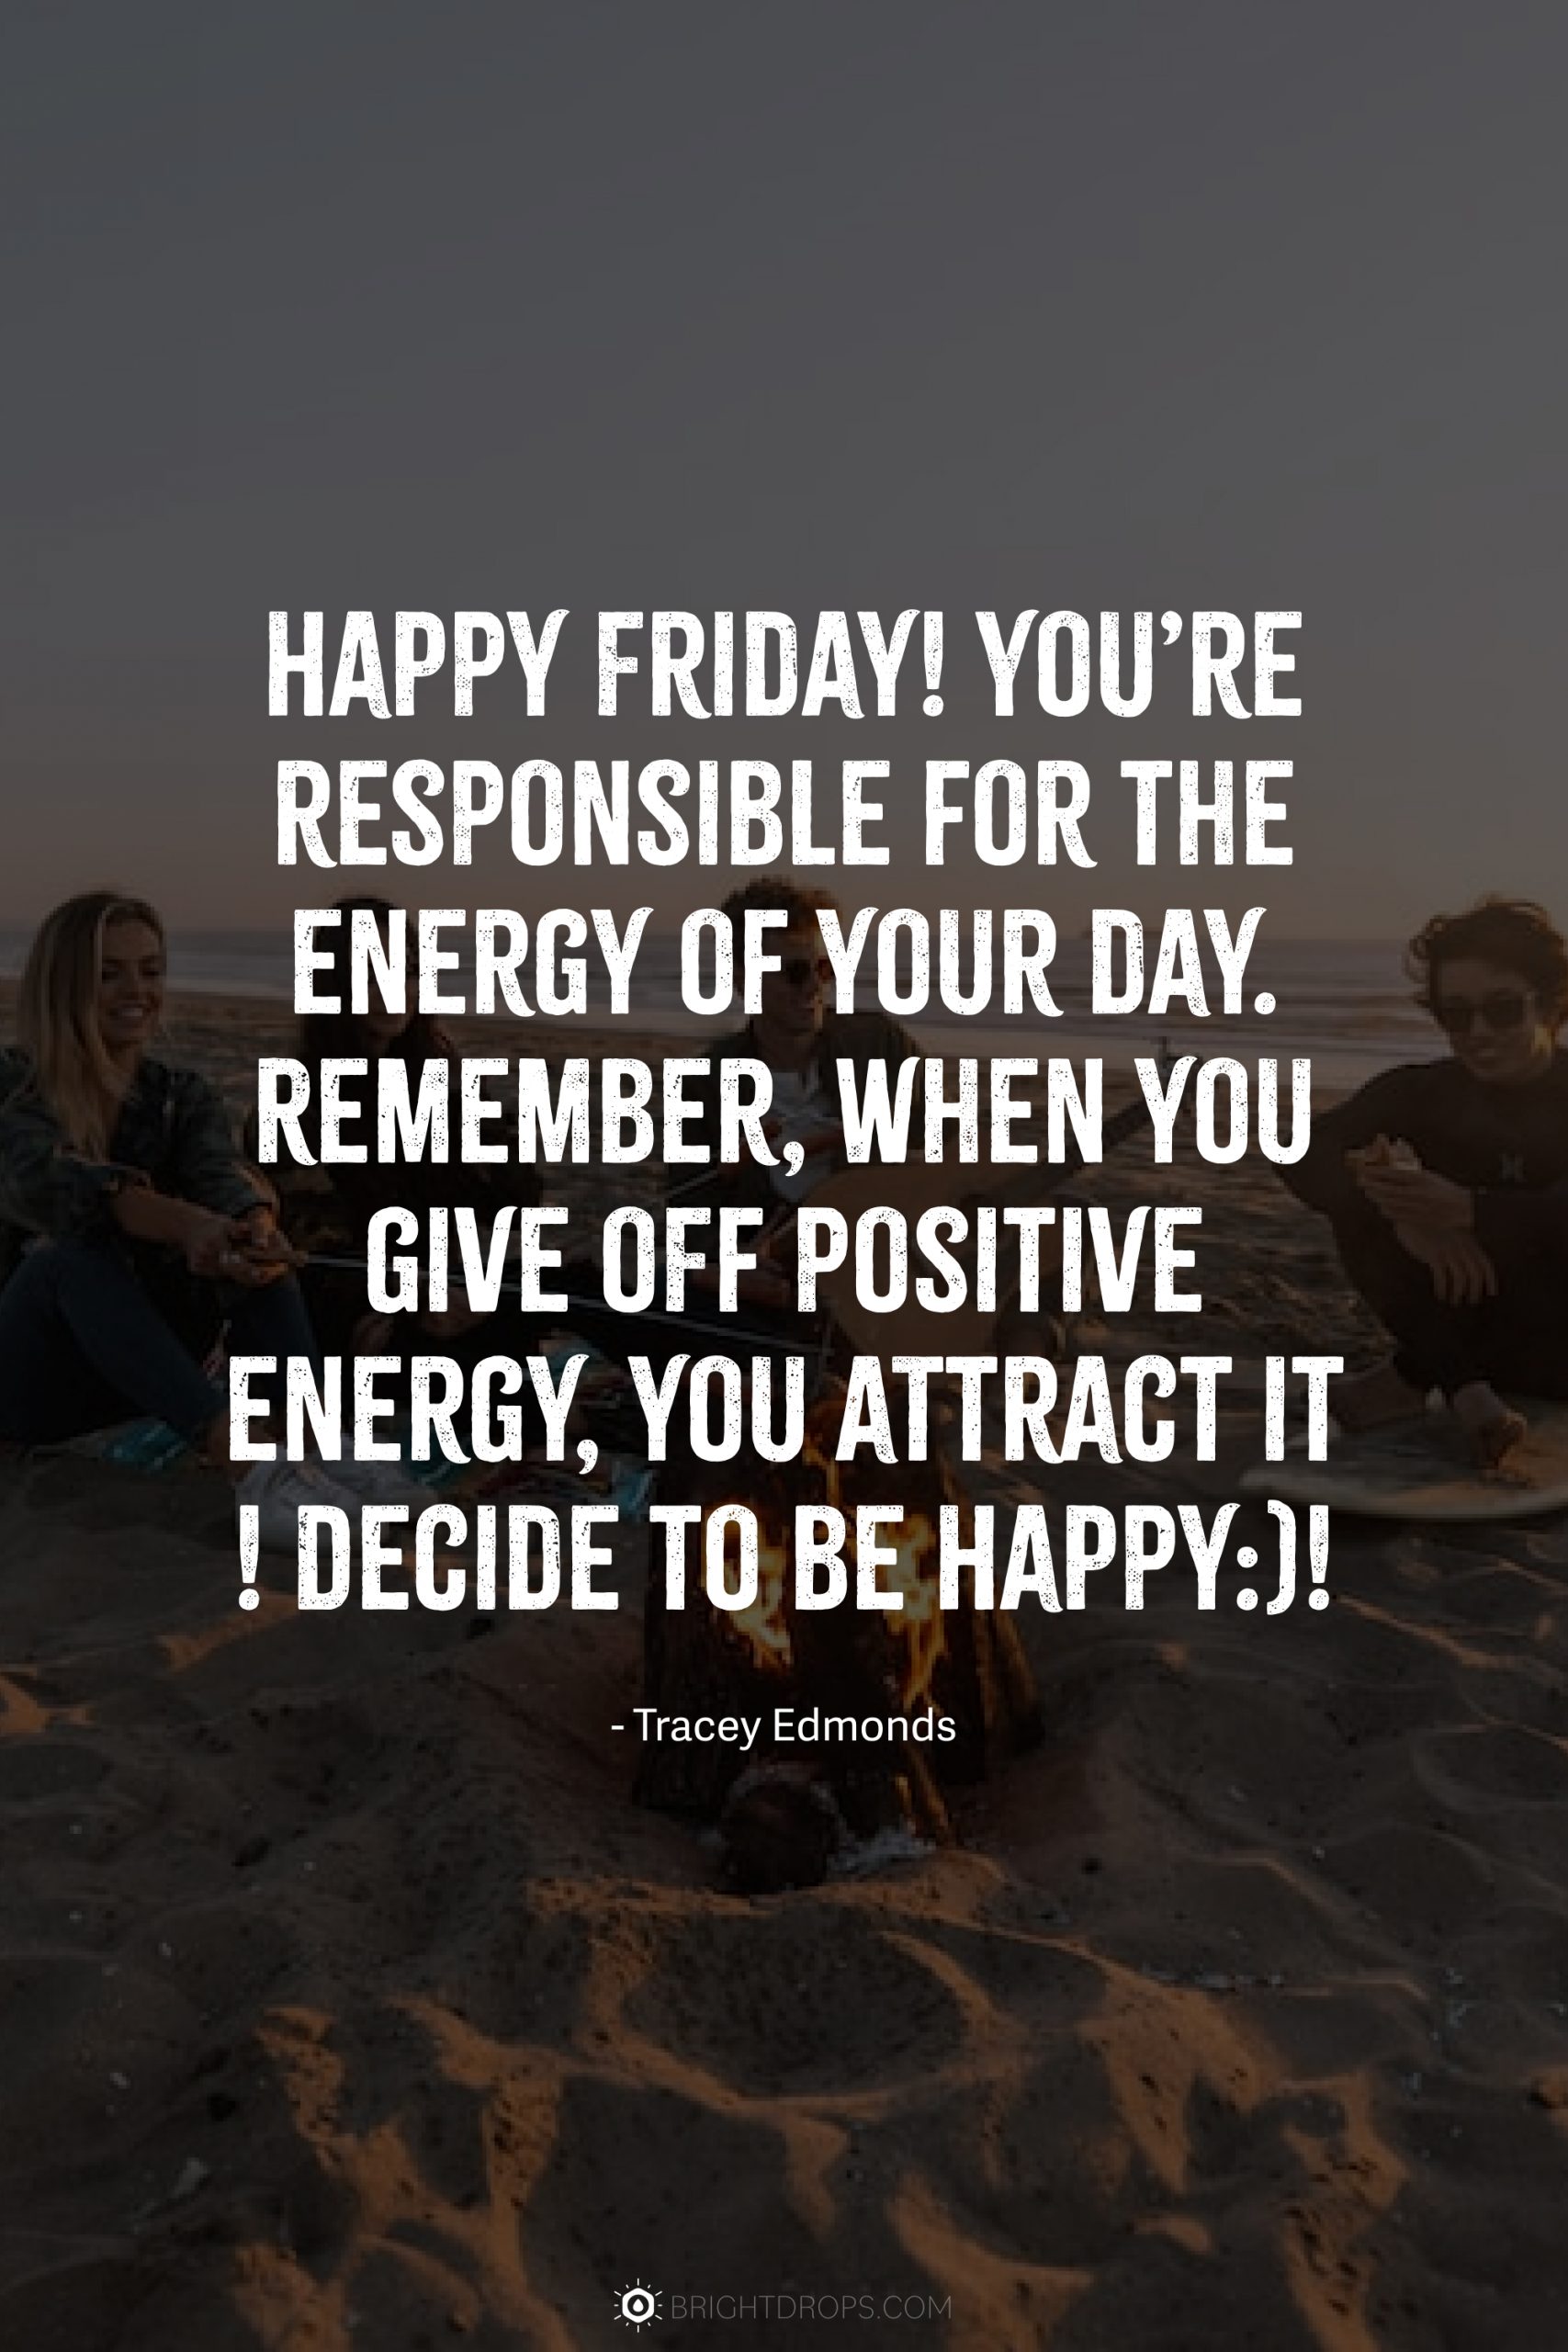 Happy Friday! You’re responsible for the energy of your day. Remember, when you give off positive energy, you attract it ! Decide to be Happy:)!